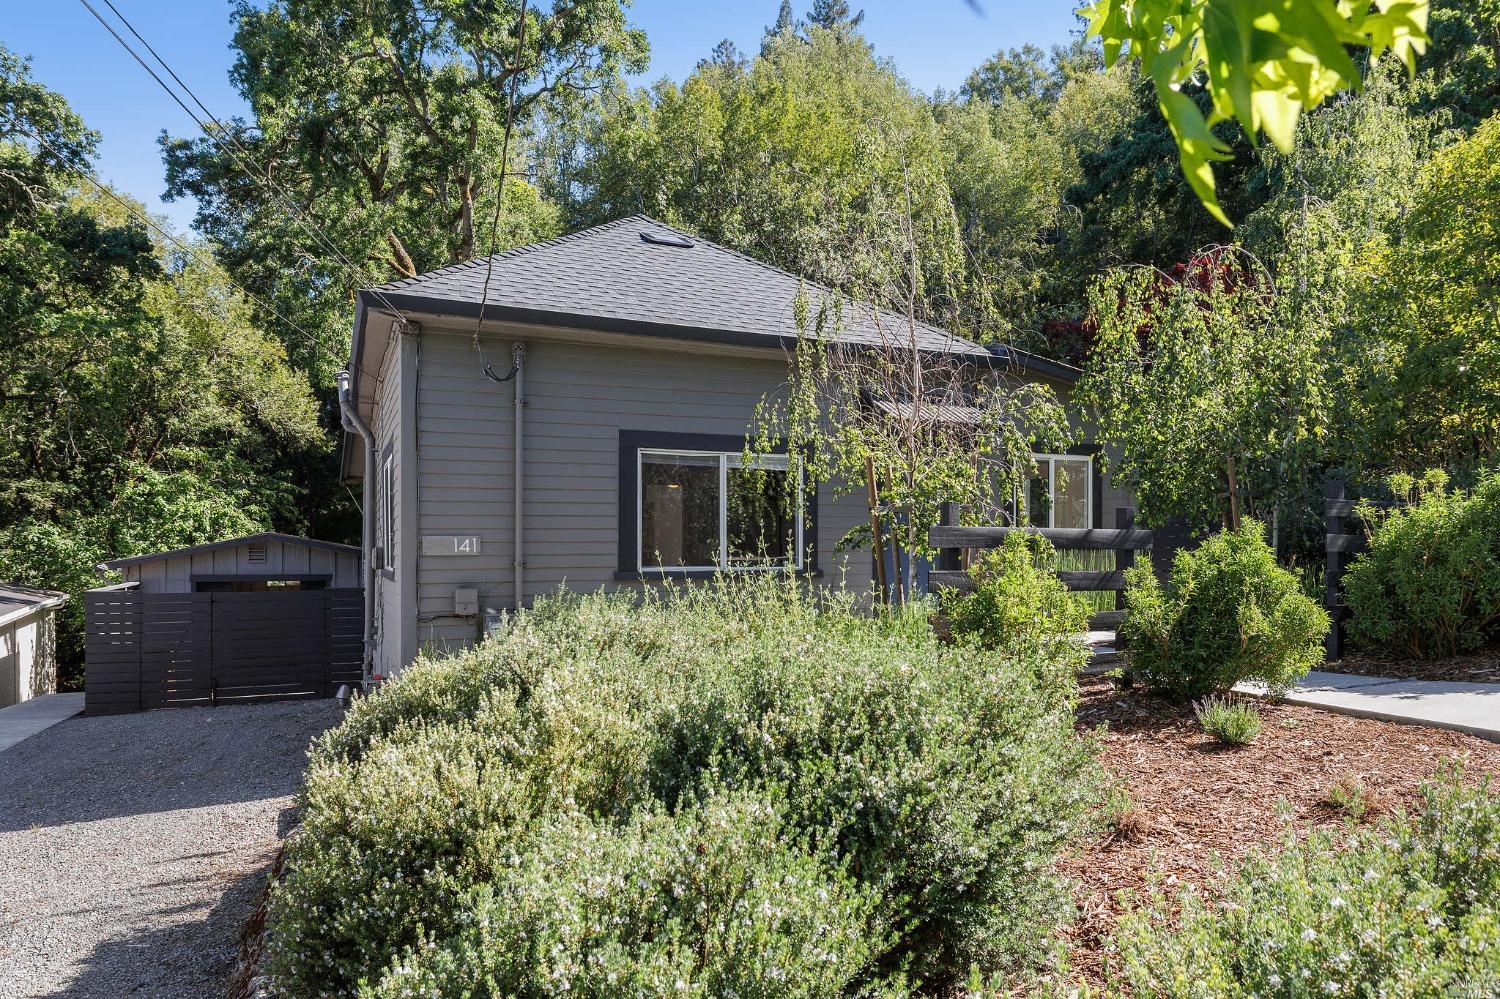 Don't miss the opportunity to own 2 homes on a large, sunny lot in beautiful San Anselmo! The detached houses have substantial separation providing excellent privacy, each with their own sun drenched patios and outdoor space.  The main house, 1032 sqft, 2BR/2BA, has a stand alone garage providing 350 sqft of space for artist or yoga studio, storage and more.  With southern exposure receiving all day sun, the lovely outdoor space includes a patio, yard, bocce court and raised flower beds.  The rear cottage is out of a story book, on magical private woodland gardens with a year round running creek.  Accessible via footbridge, 2nd house is 578 sqft 1BR/1BA and was remodeled in 2020 to modern living standards while maintaining the home's charm. Features include an entry patio, large craft studio on lower level and the bedroom has beautiful views and a terrace.  Property has a crushed bluestone driveway with plenty of on street parking available.  Classified multi-family, this property presents great opportunities as an investment property or for first time home buyers, rent out the cottage to offset your mortgage payment.  Consistent rental history.  Not in a flood zone!  Close to great schools, biking and hiking trails, downtown San Anselmo and Fairfax, 141 Scenic is a must see!